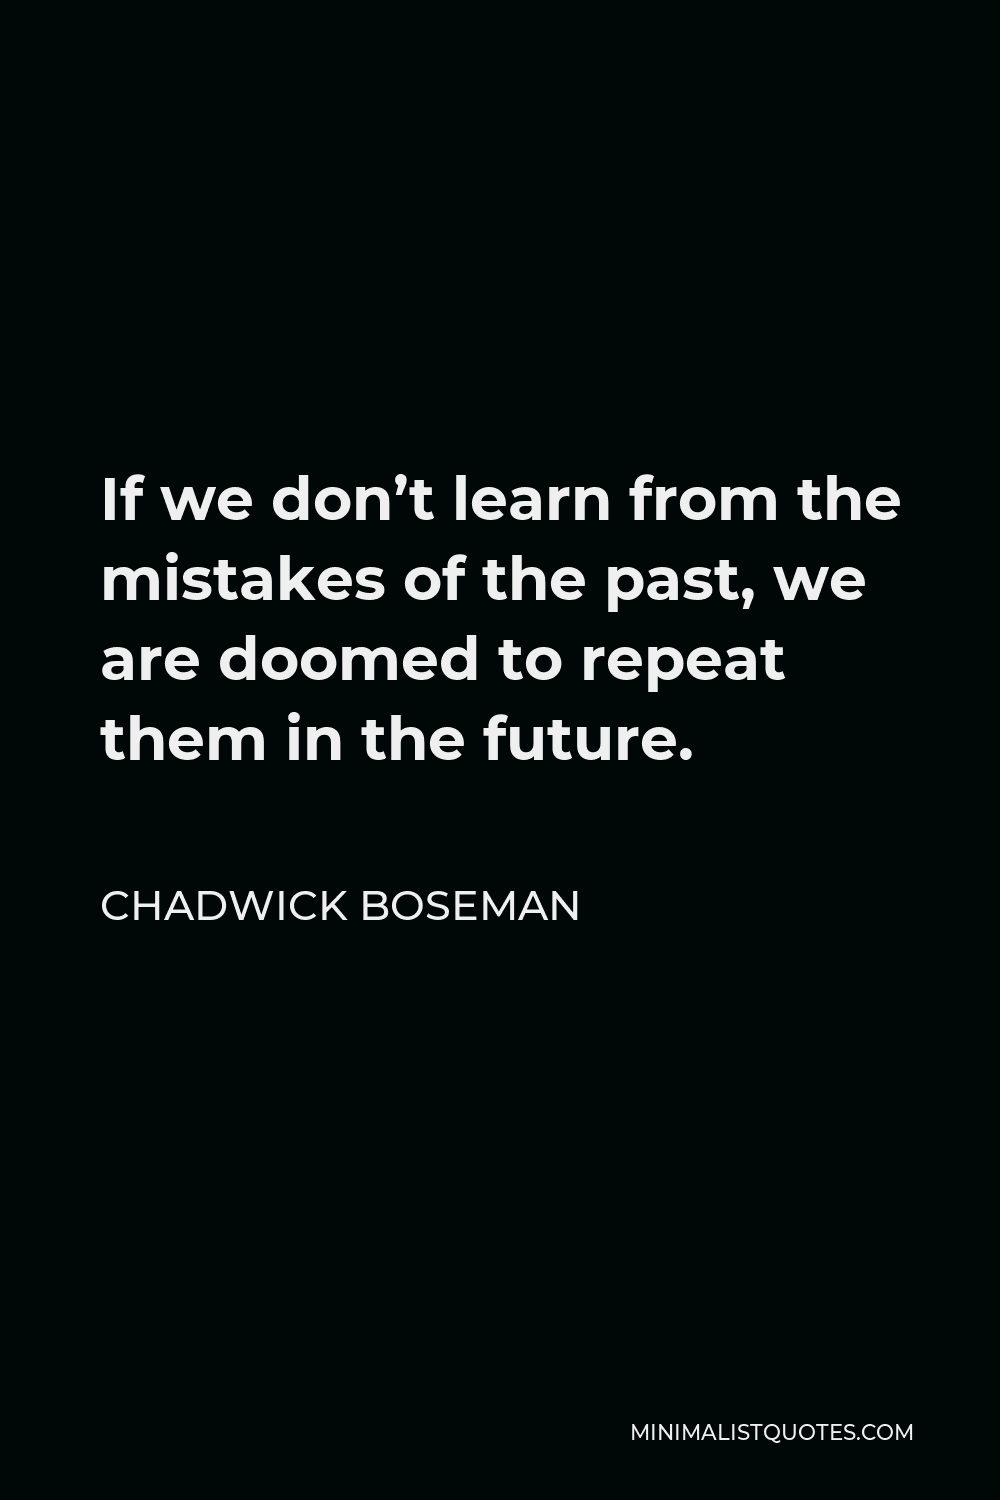 Chadwick Boseman Quote: If we don't learn from the mistakes of the past ...